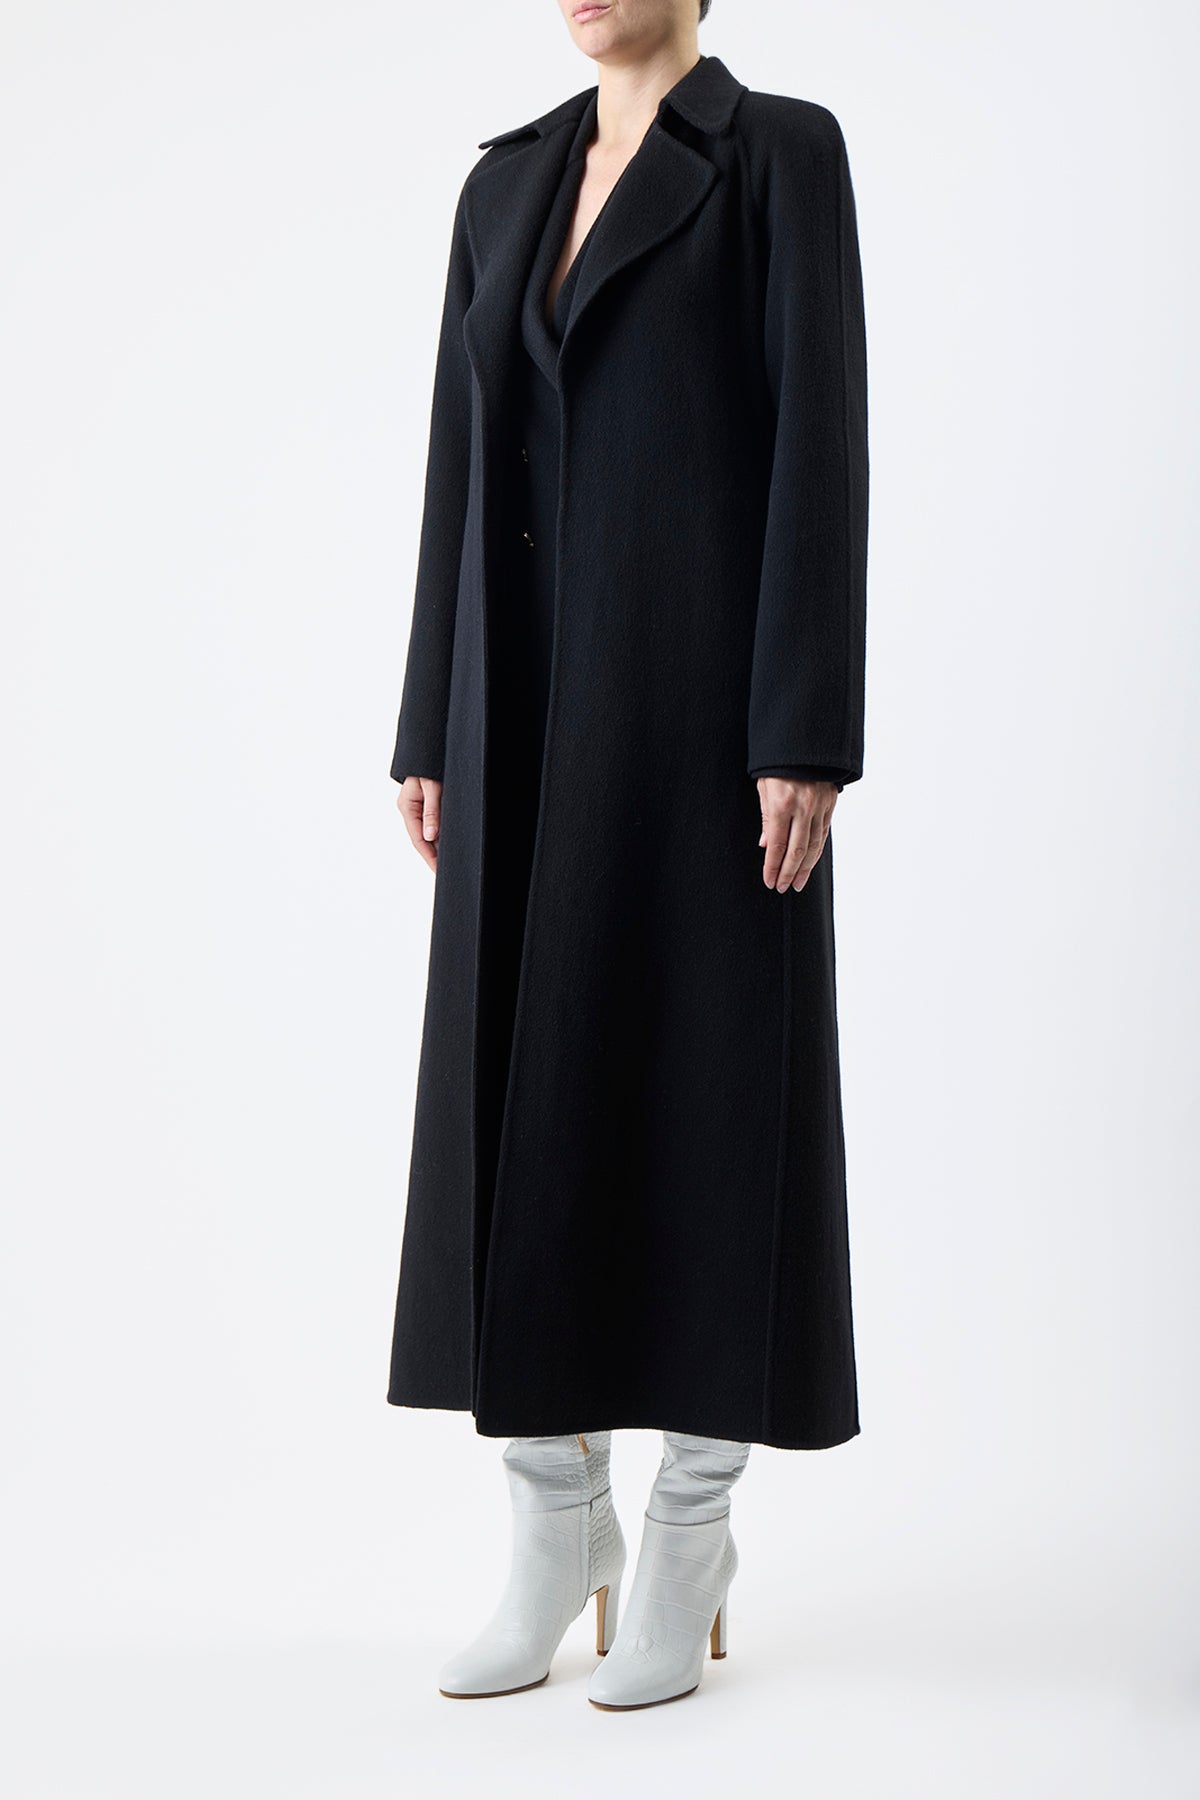 Lachlan Trench Coat in Double-Face Recycled Cashmere – Gabriela Hearst